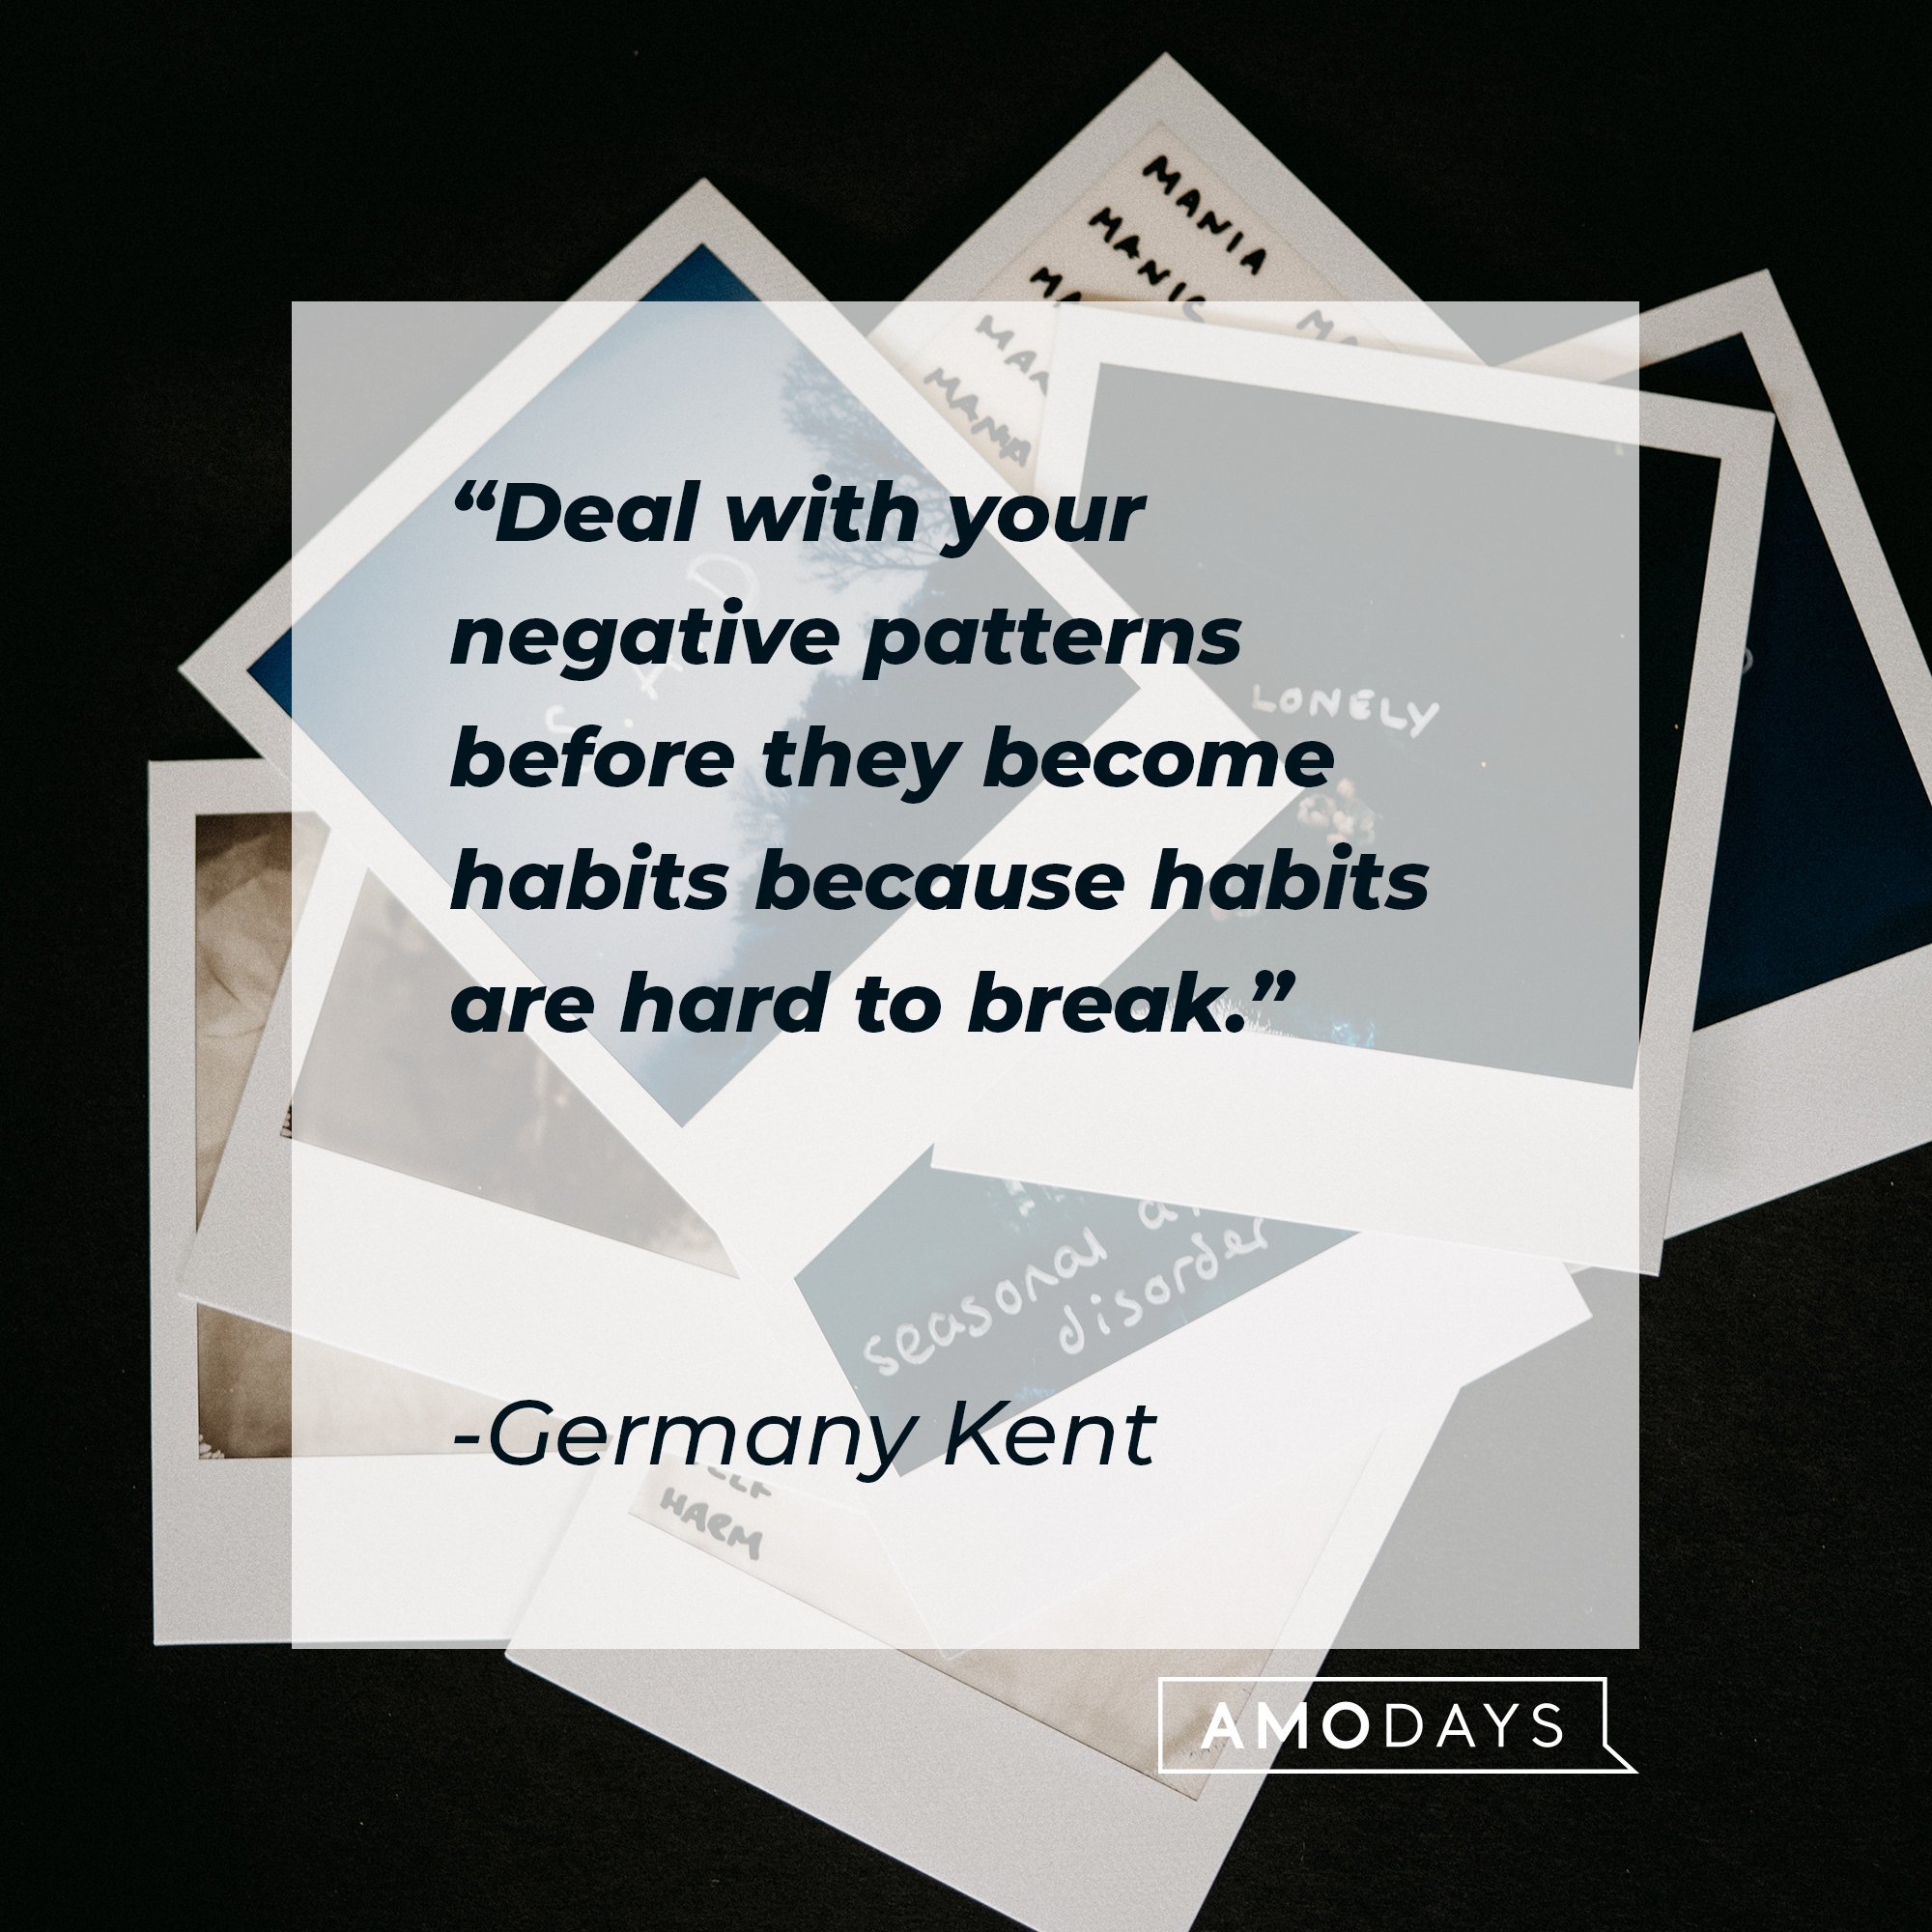 Germany Kent’s quote: "Deal with your negative patterns before they become habits because habits are hard to break." | Image: AmoDays   